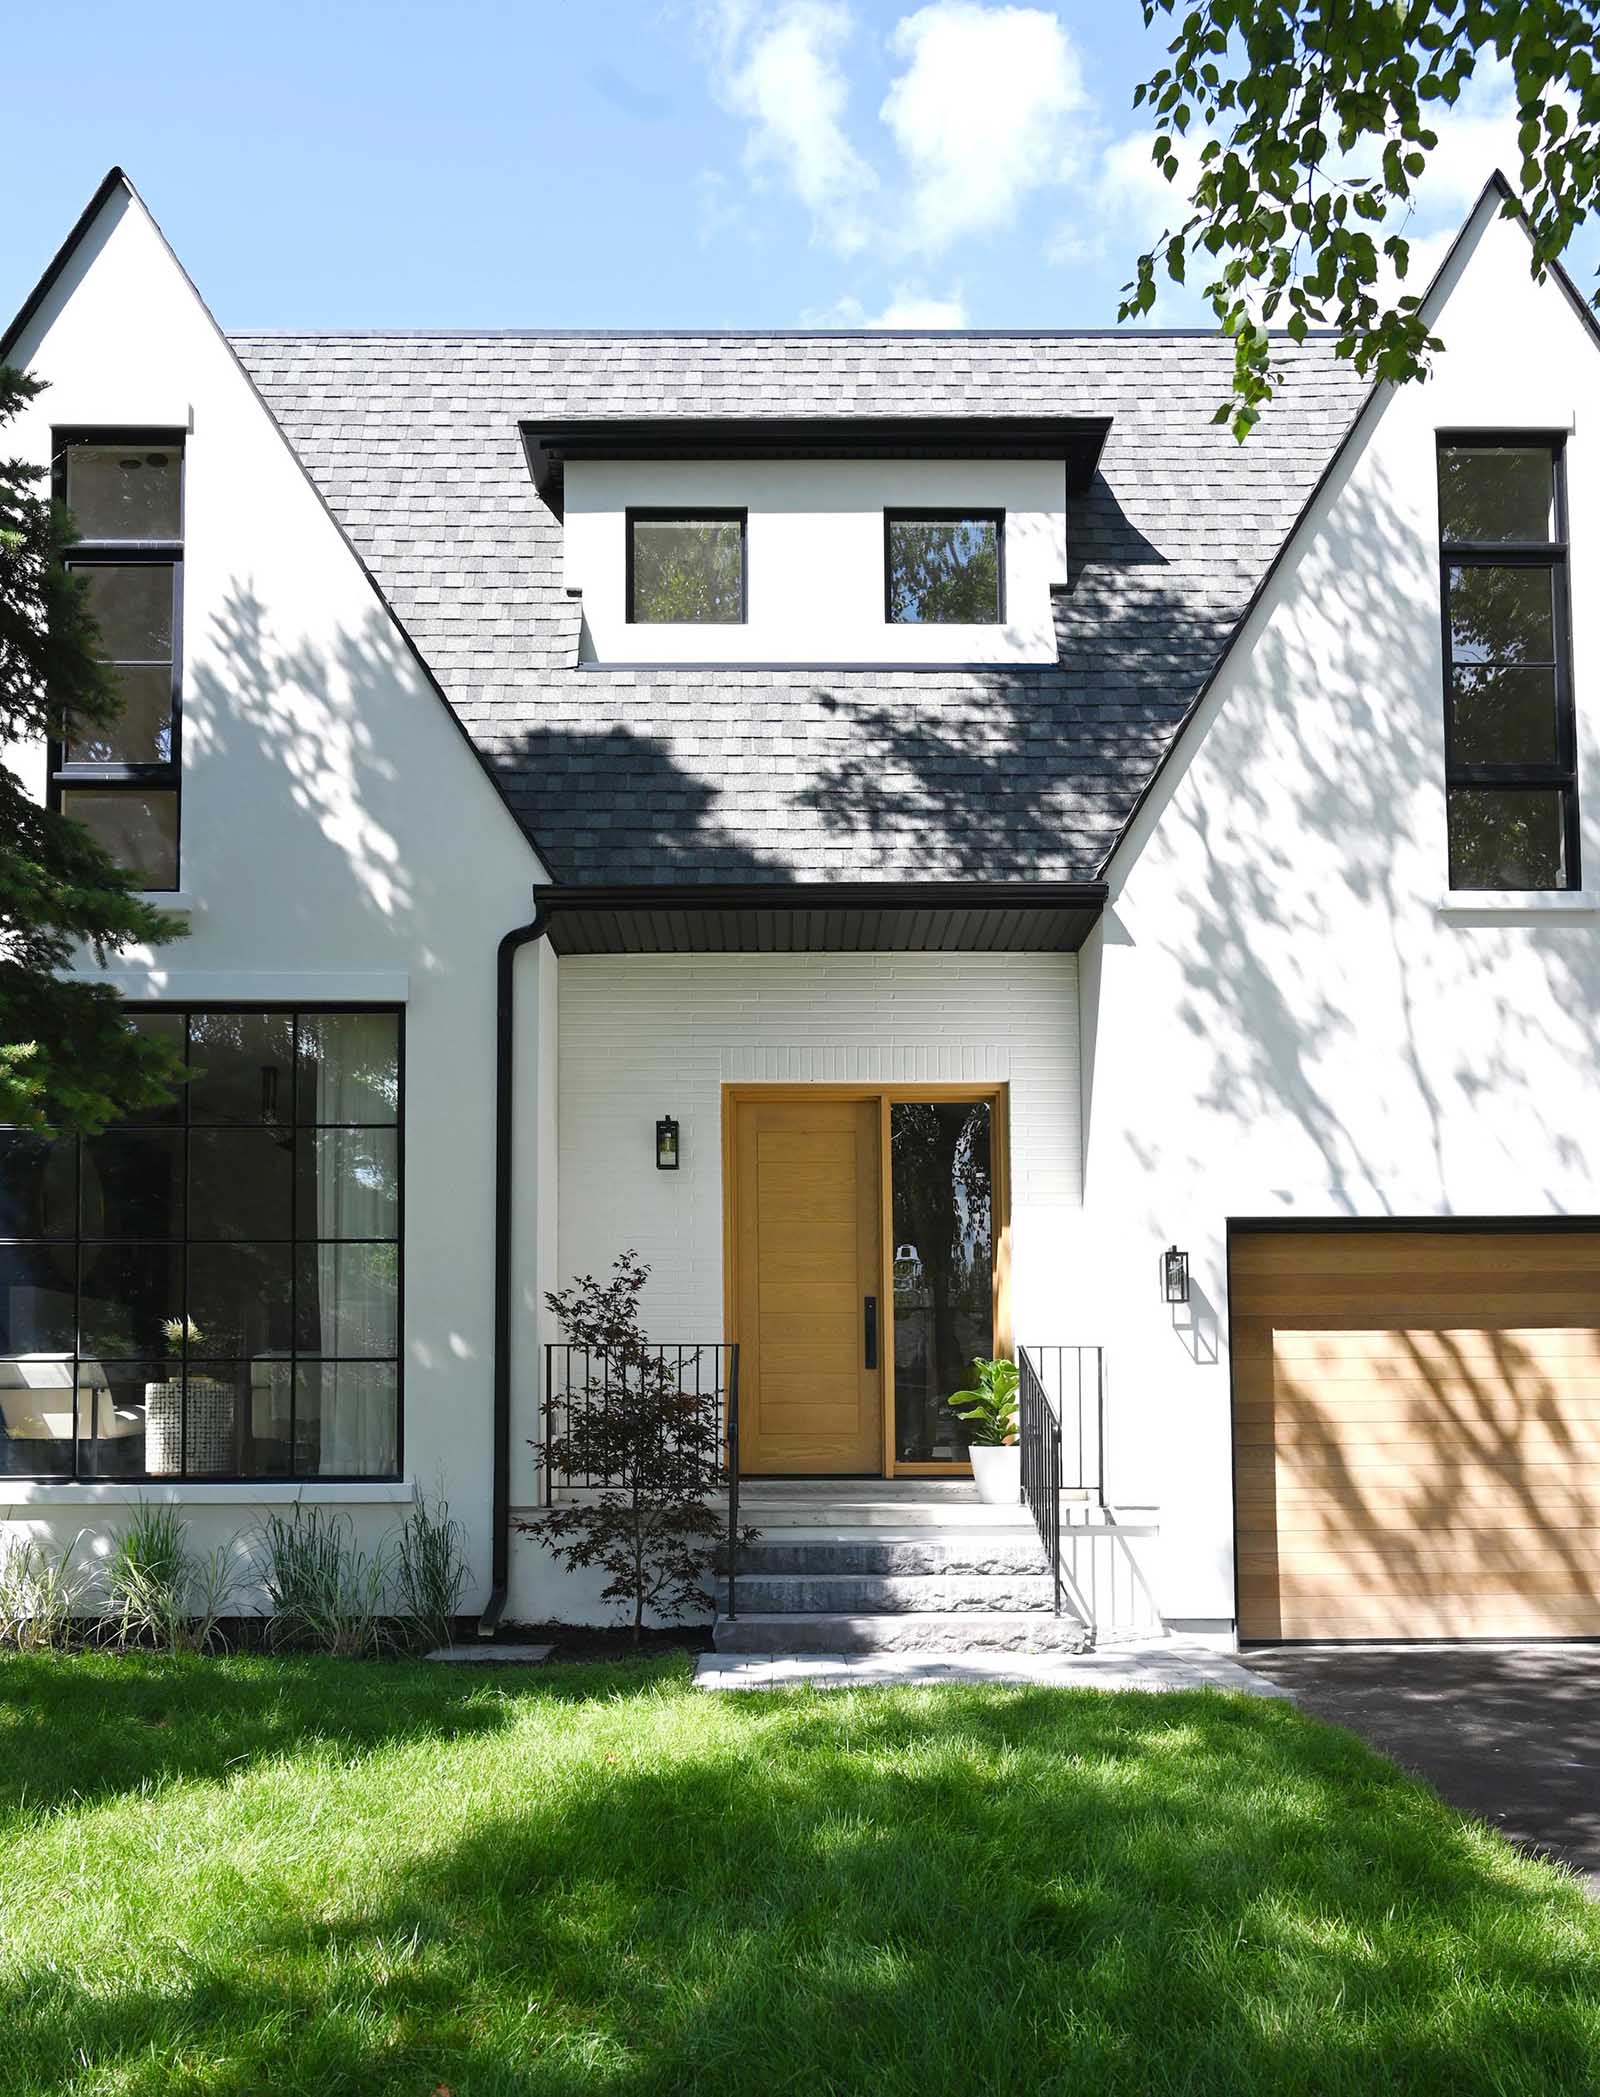 This contemporary home was inspired by farmhouse living, with the white exterior accented by natural white oak wood to add a warm welcome and a hint at what lies beyond.